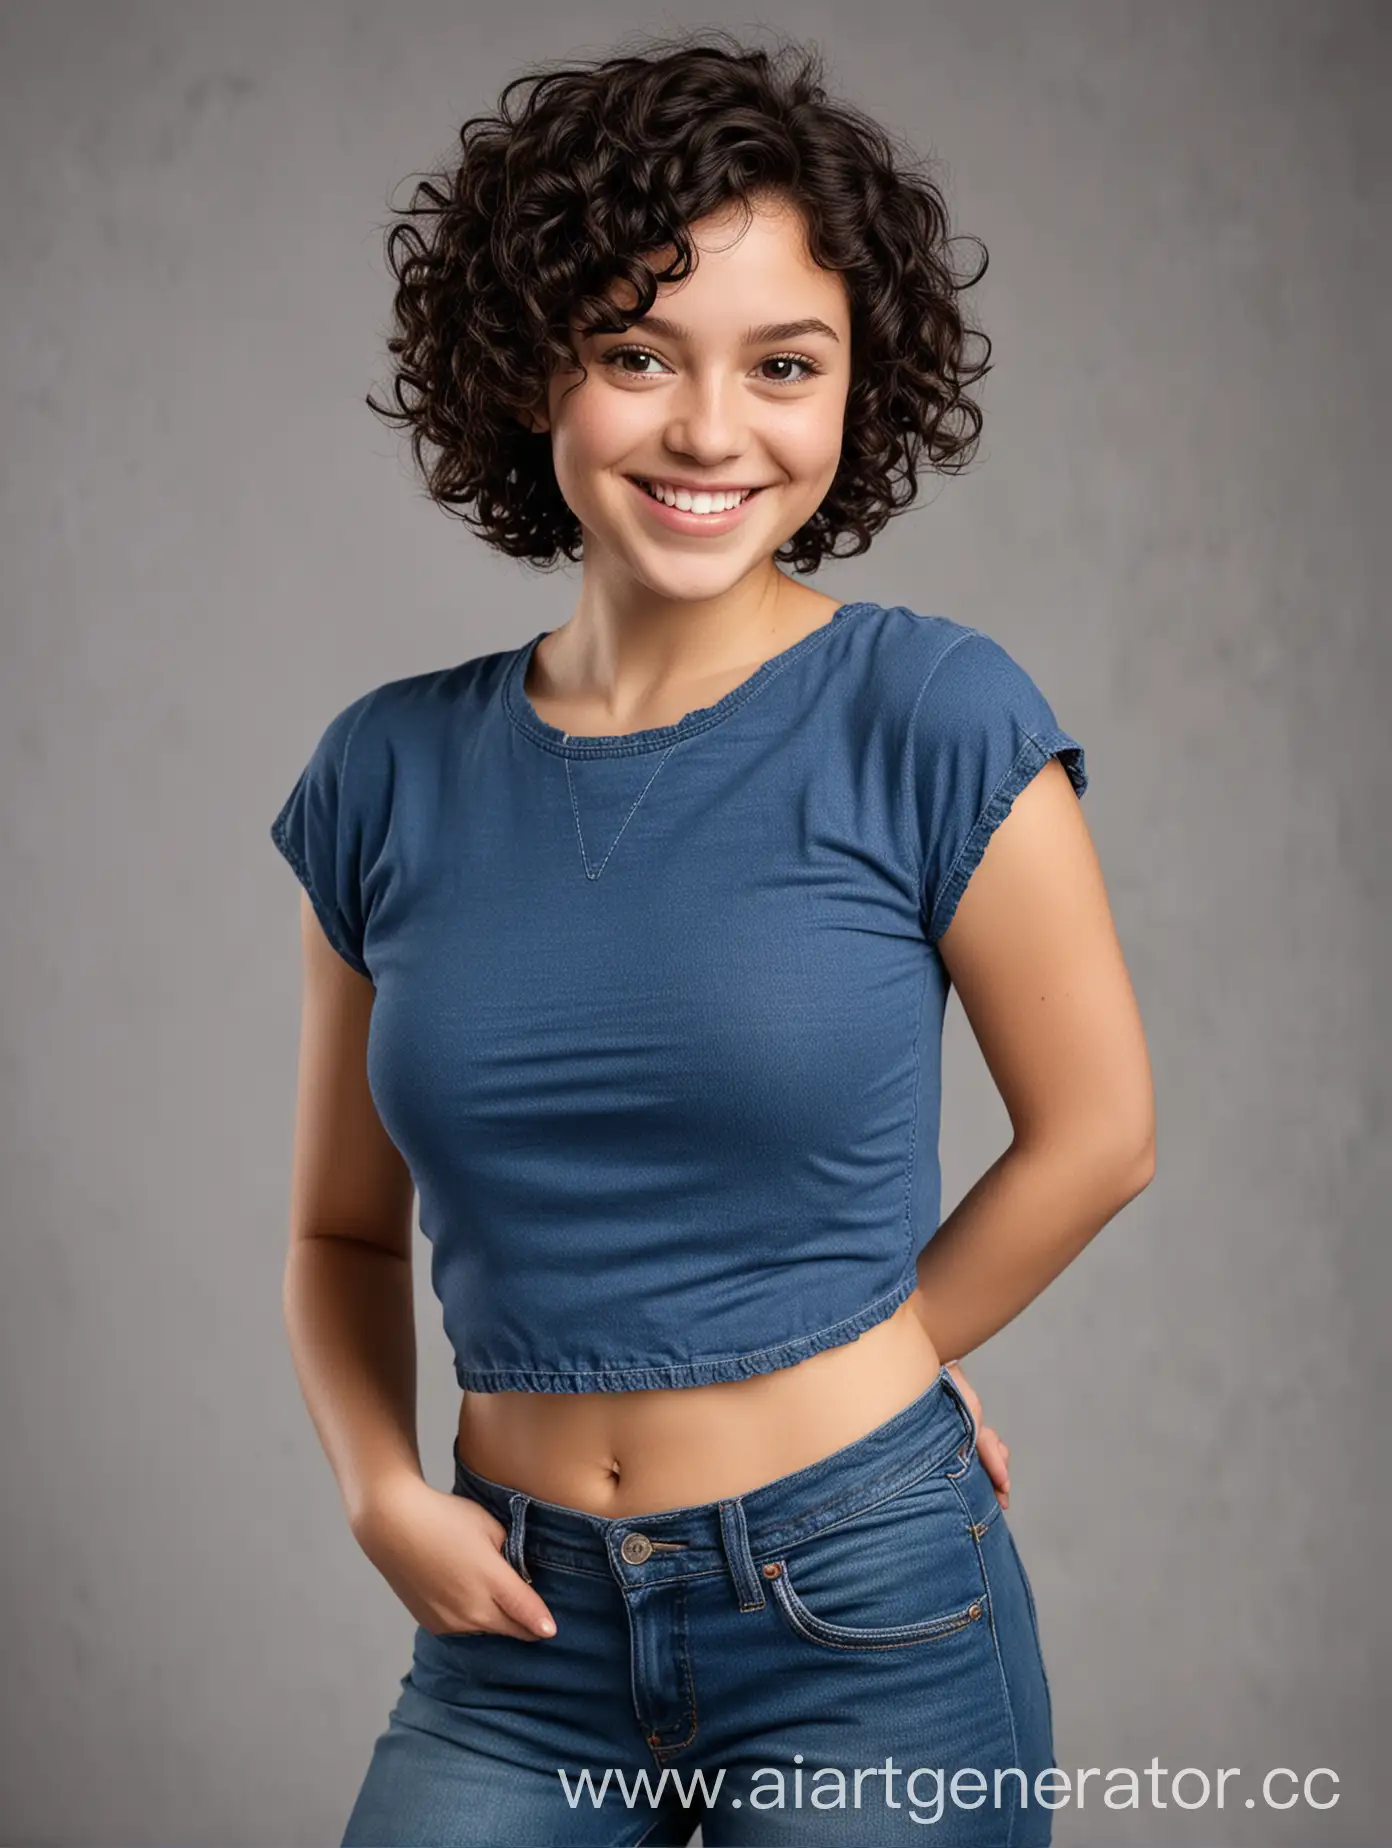 a short girl with very short dark curly hair, a sweet smiling face, wears a blue top and blue jeans